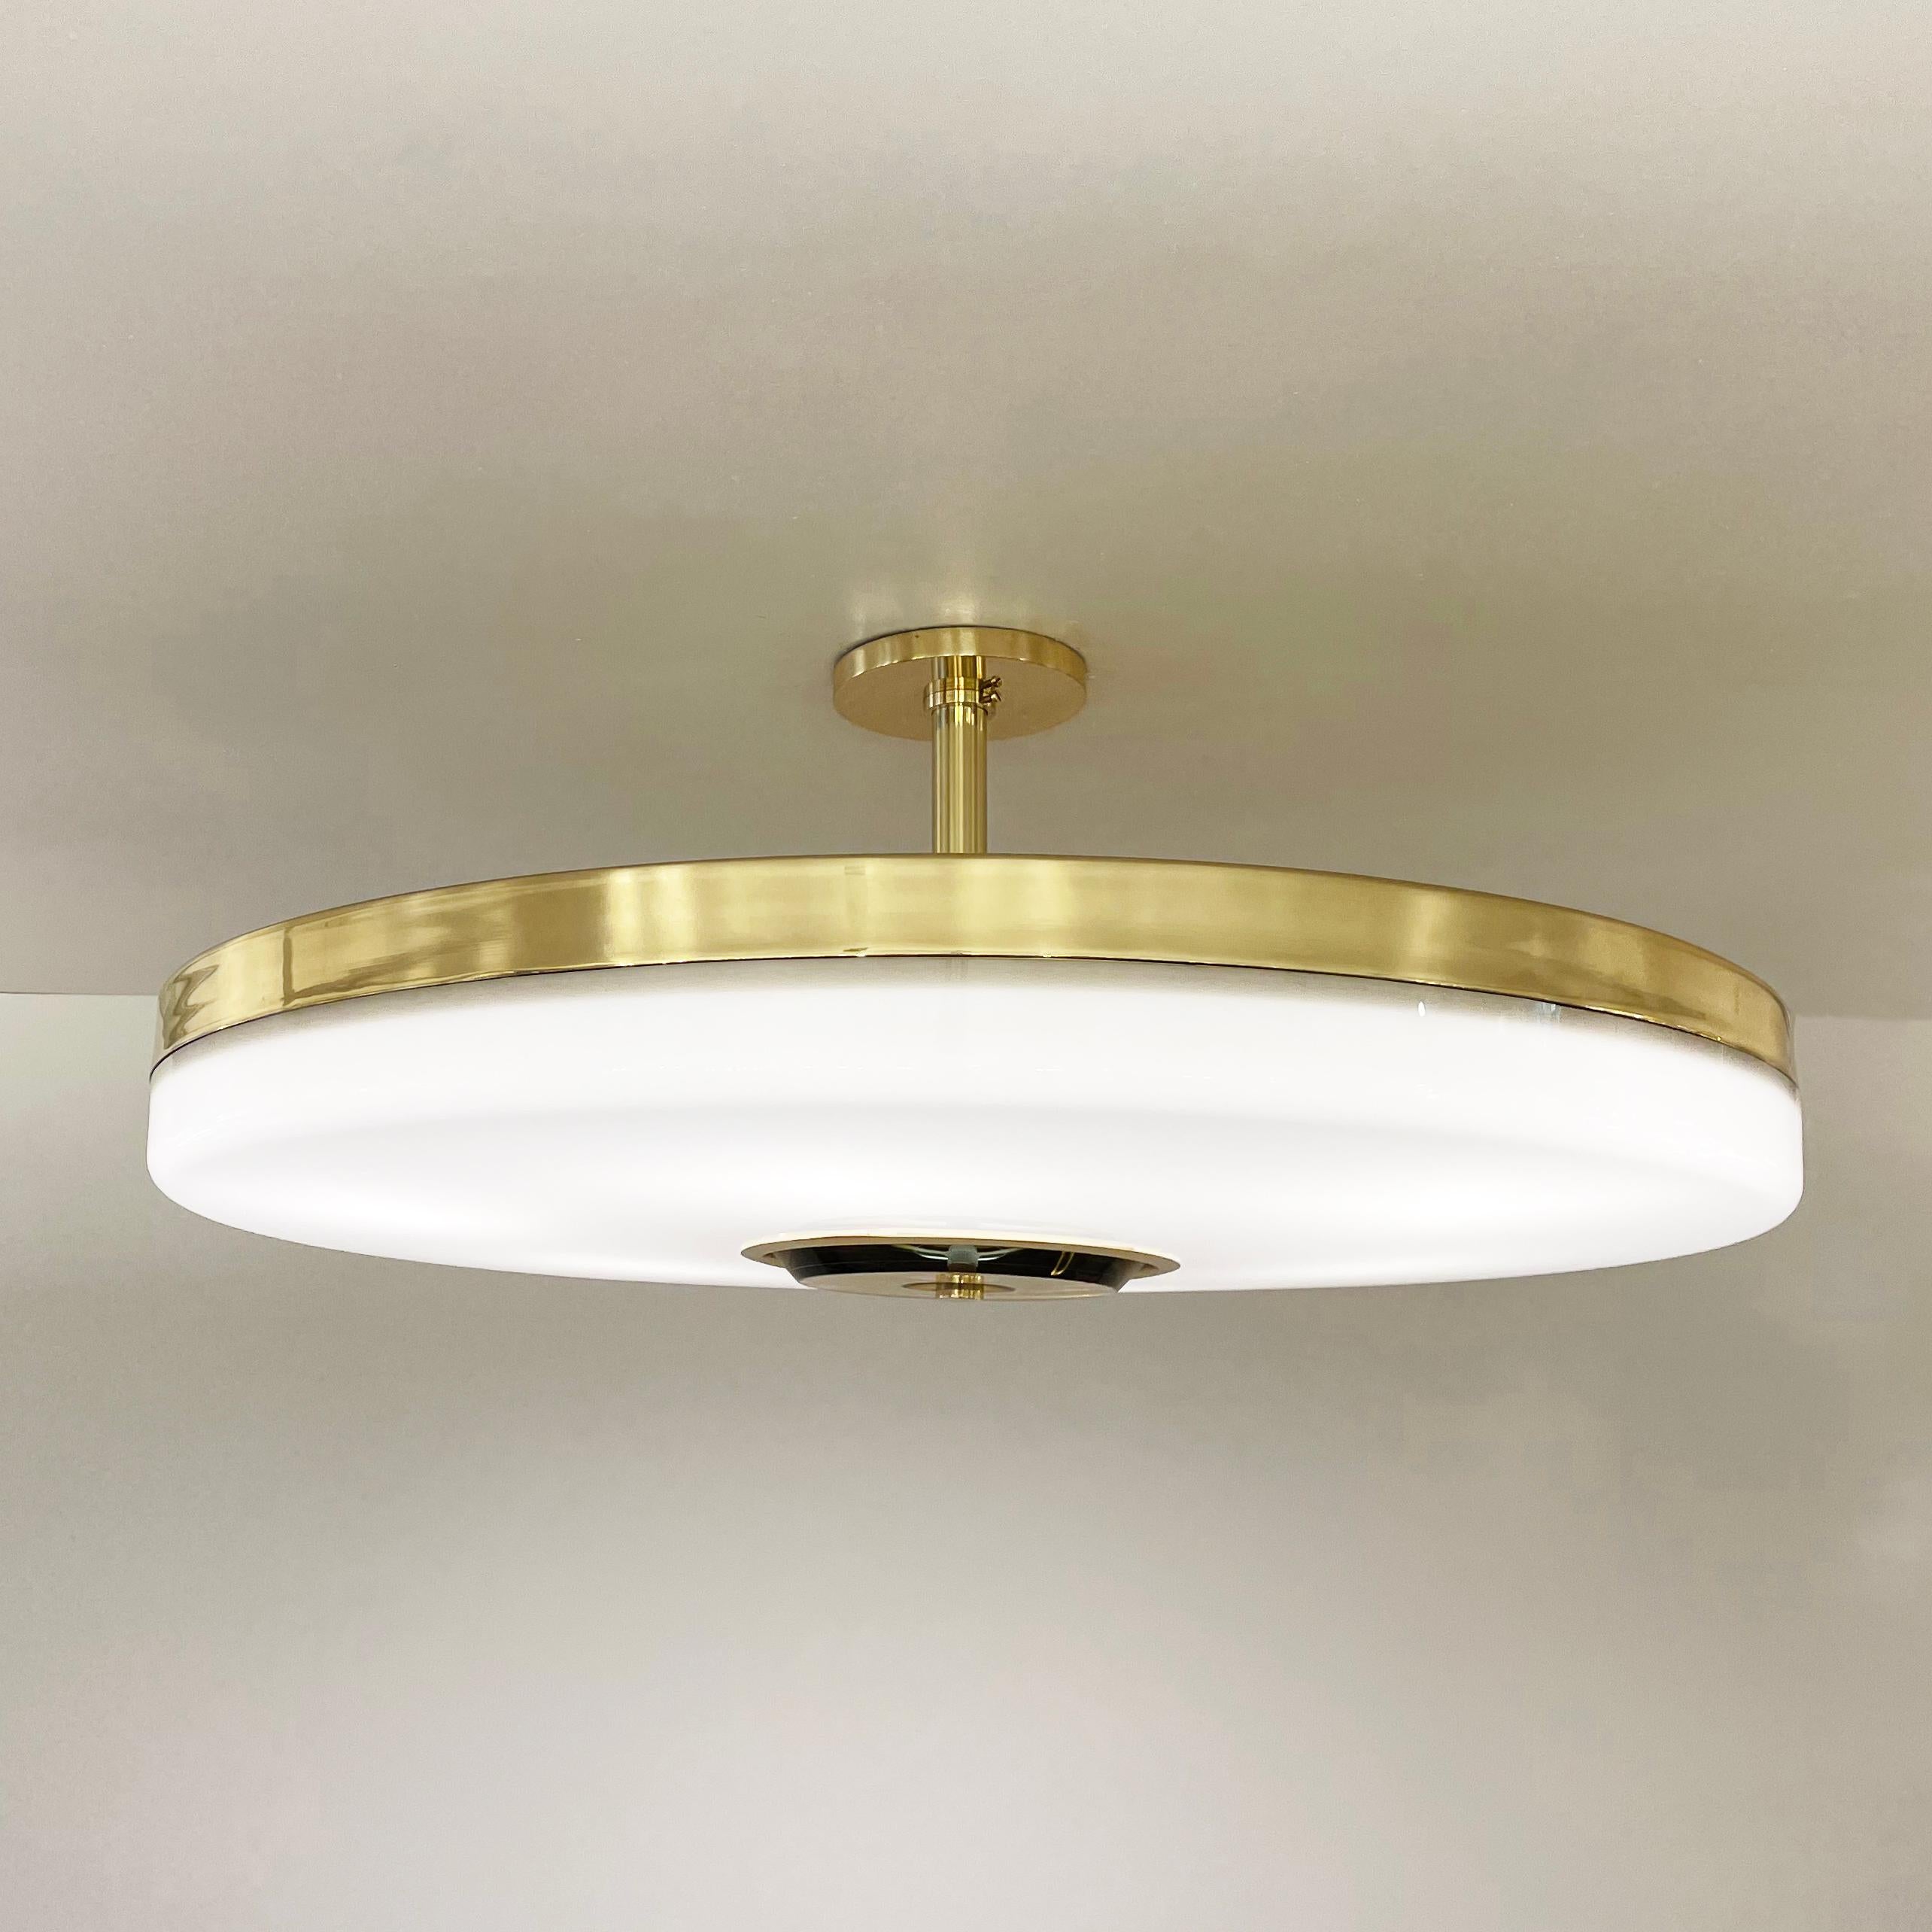 Italian Iris Grande Ceiling Light by Gaspare Asaro - Polished Brass Finish For Sale